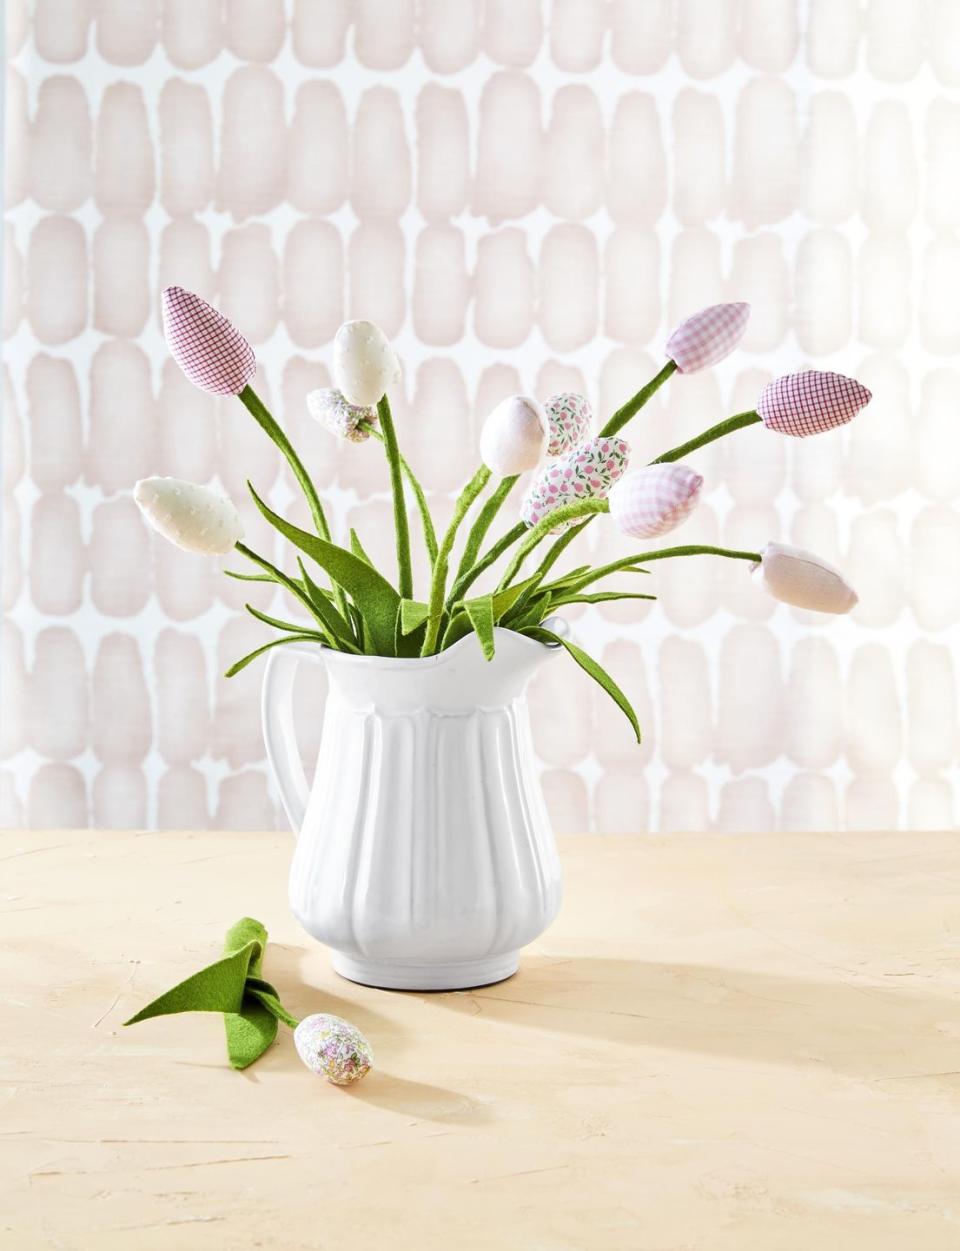 faux tulips with blooms made from pink and white solid, gingham, and floral patterned fabrics attached to wired green felt stems, displayed in white ceramic pitcher